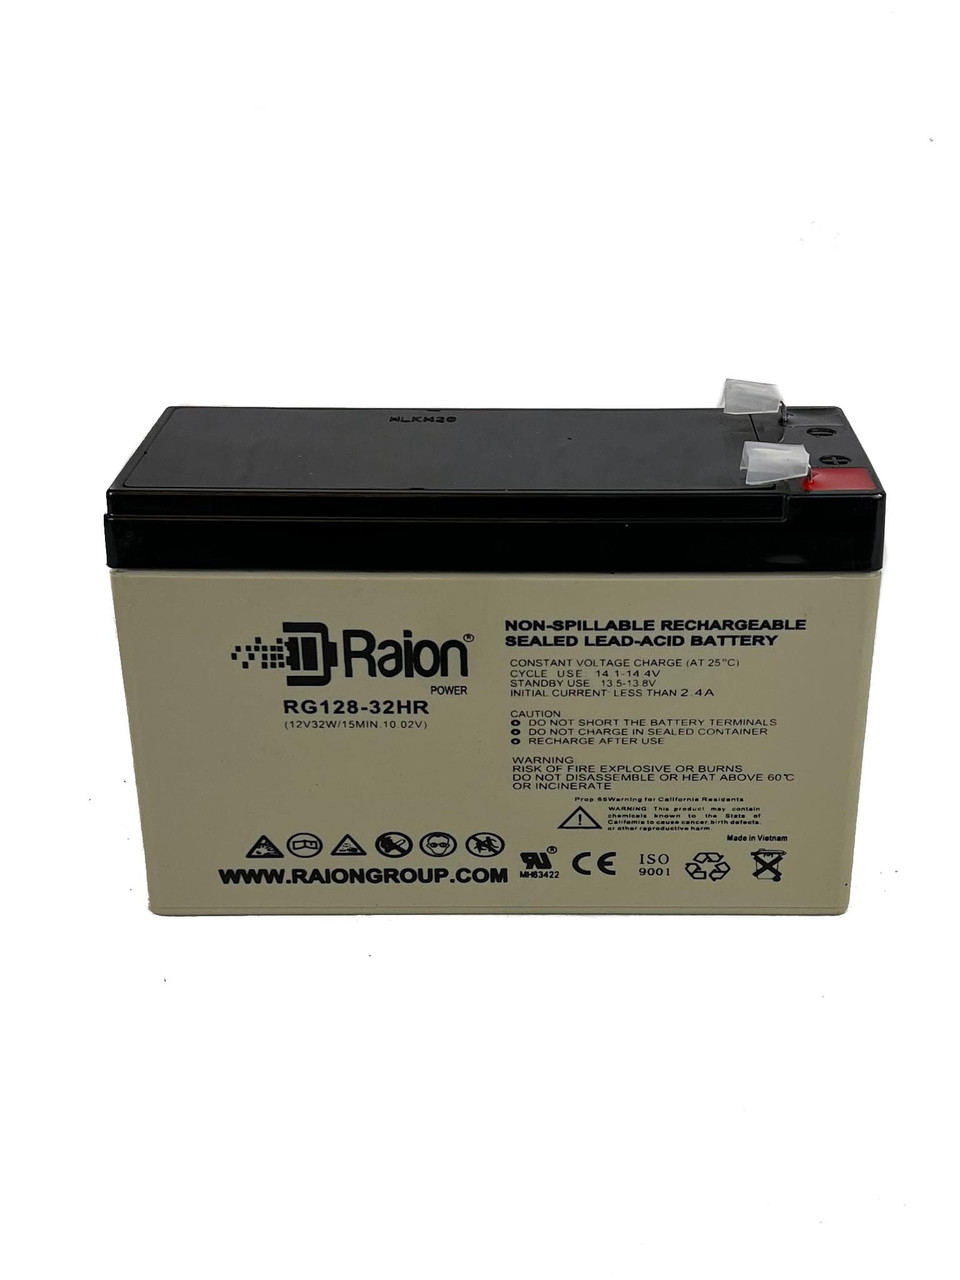 Raion Power RG128-32HR Replacement High Rate Battery Cartridge for Verizon 612 ONT Broadband